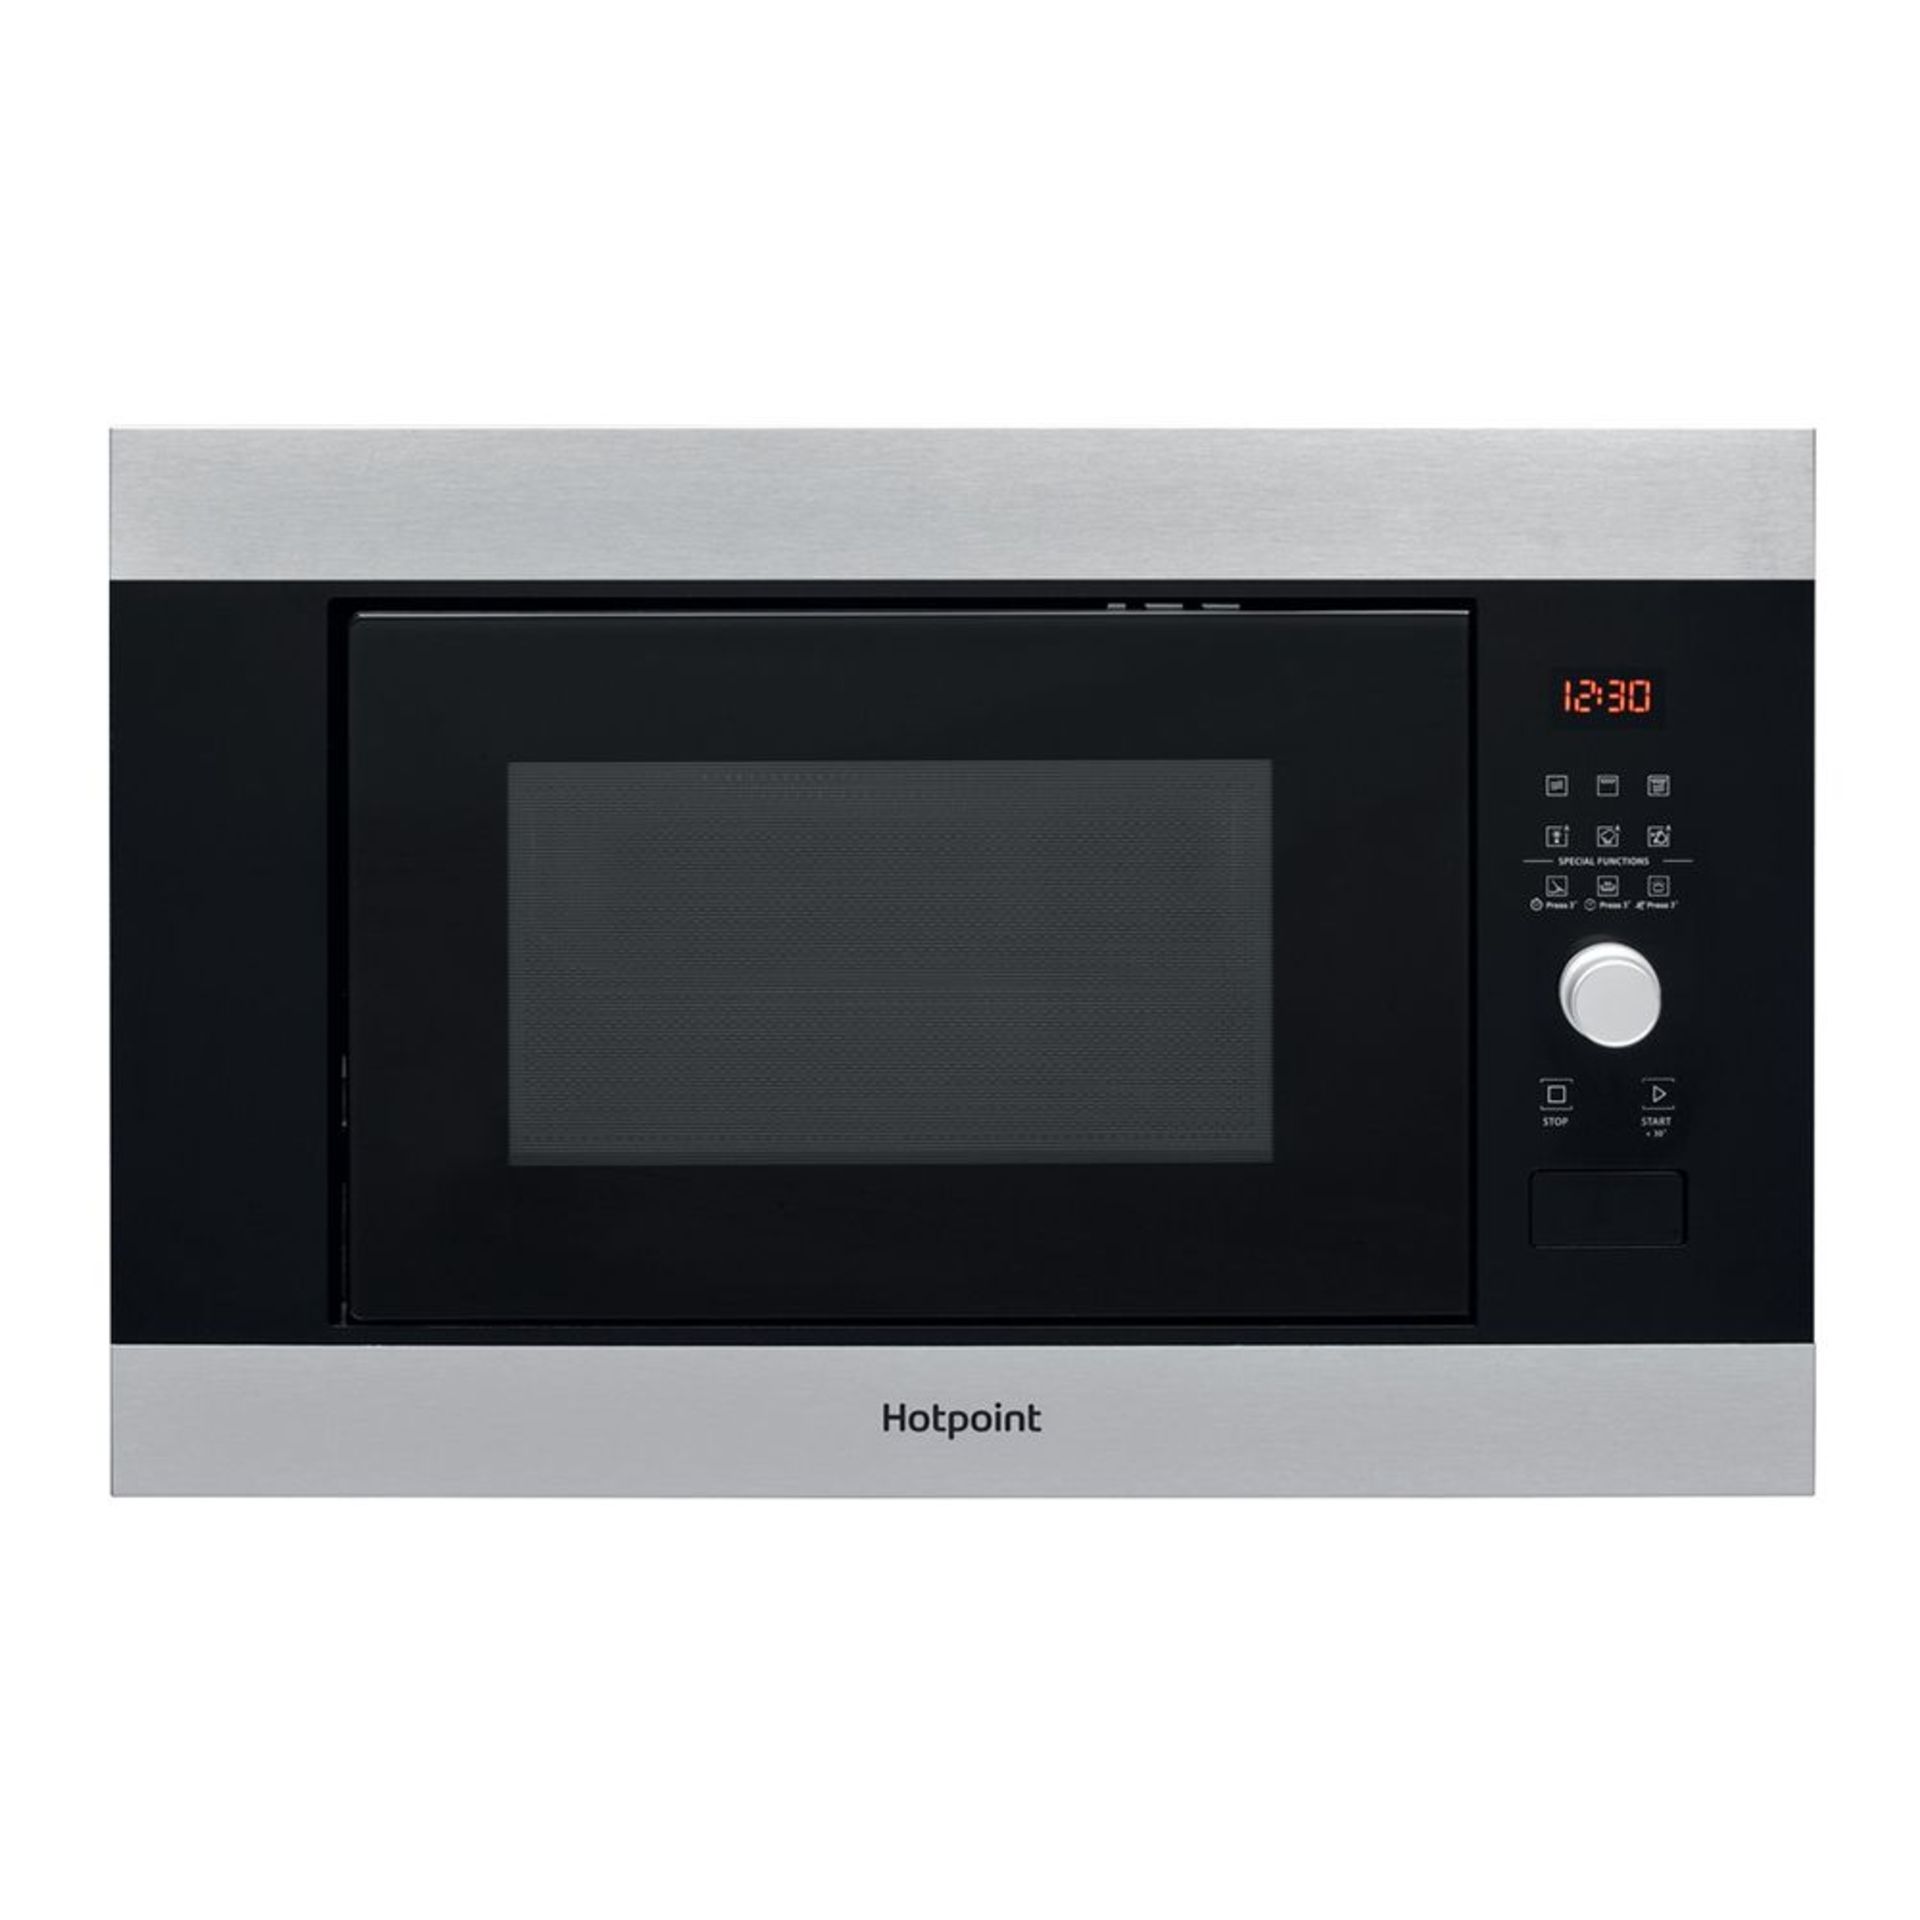 (AG35) New Hotpoint MF25GIXH Built In 25L 1000W Microwave and Grill Stainless Steel. RRP £289.99.